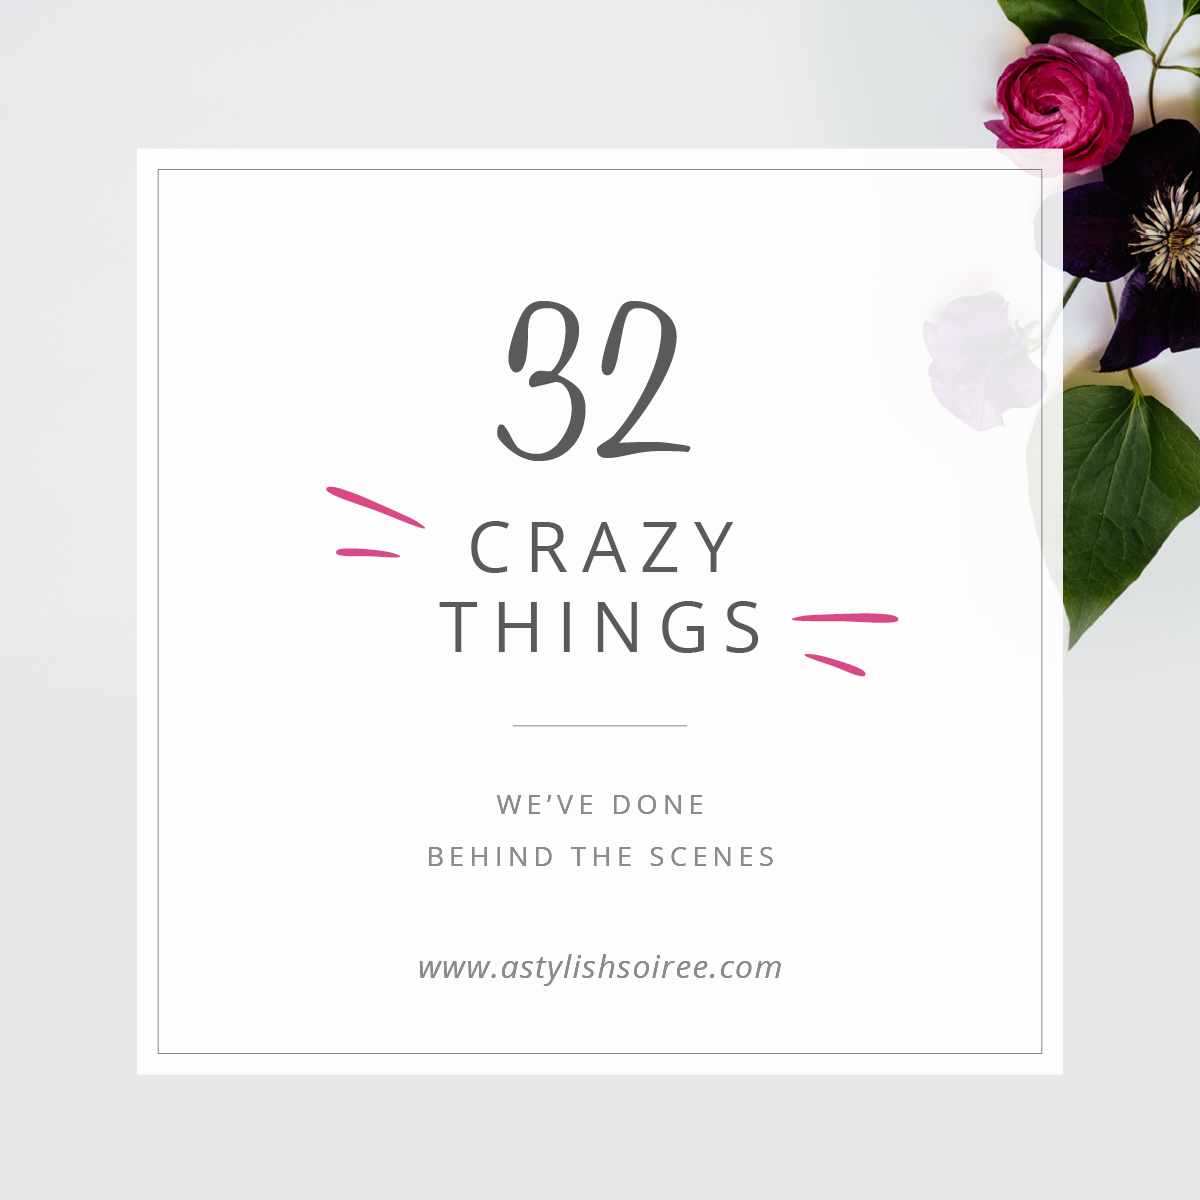 Best Dallas Wedding Planner | Behind the Scenes: 25 Things Your Wedding Planner Will Do That You Won't Even Know About